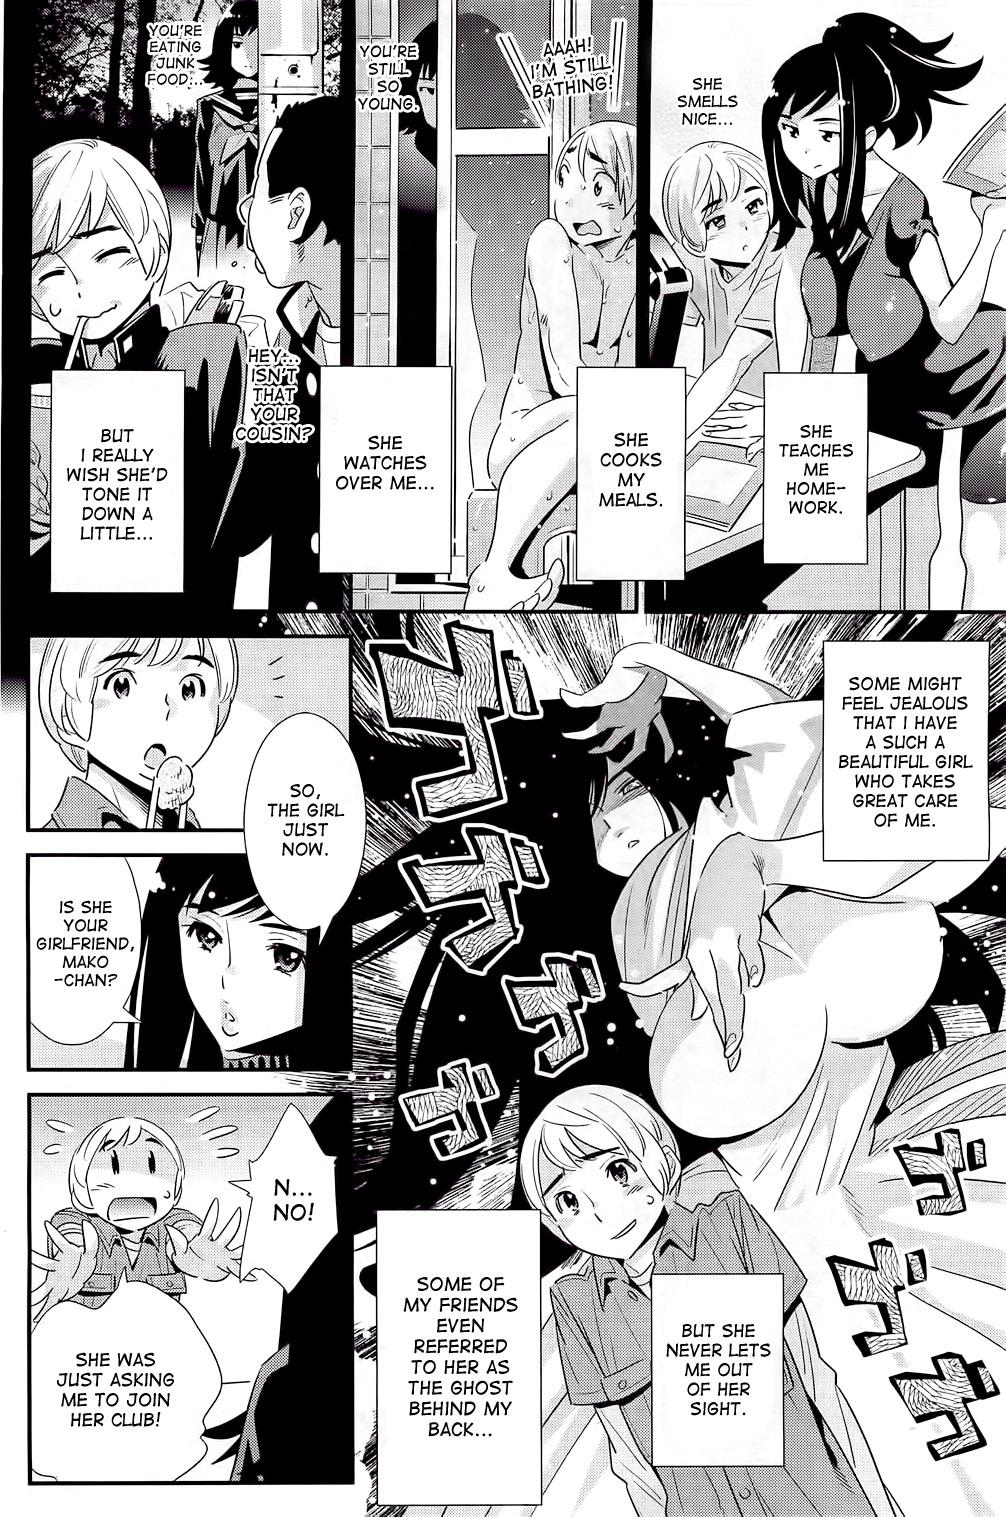 Pene Boku no Haigorei? | The Ghost Behind My Back Teasing - Page 4